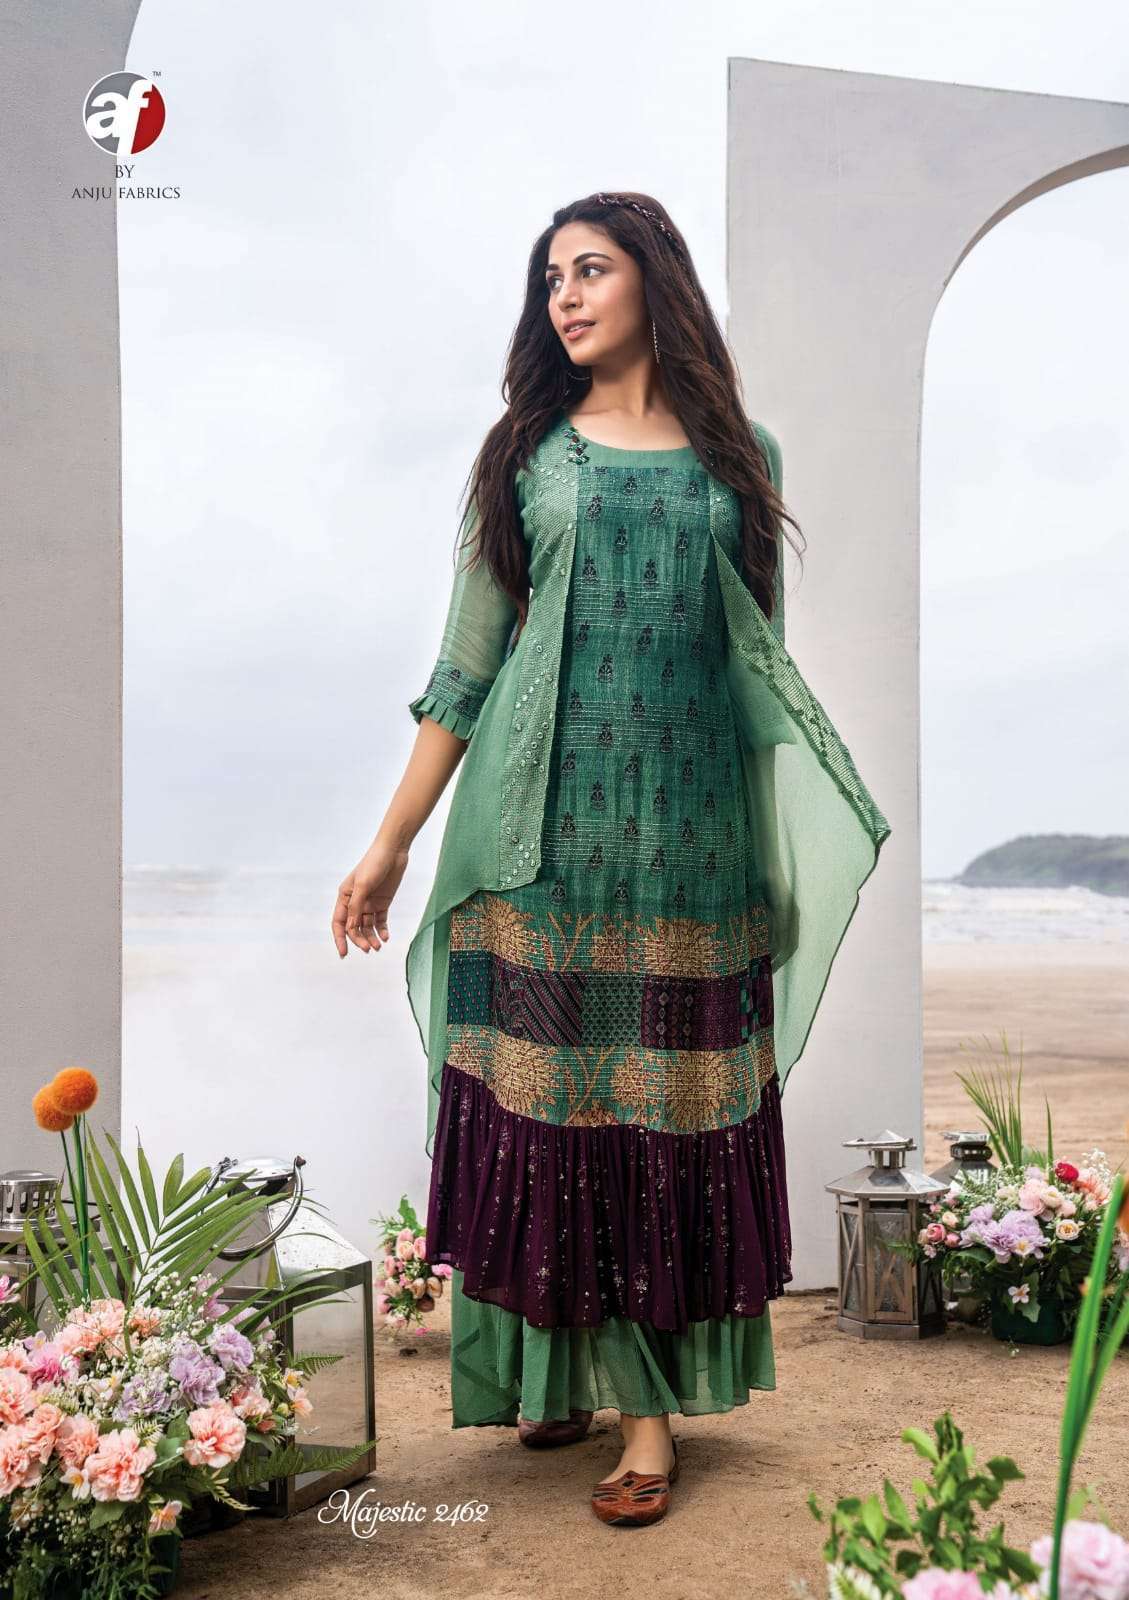  ANJU FABRIC PRESENT MAJESTIC PARTYWEAR DESIGNER GOWN STYLE LONG KURTI COLLECTION IN WHOLESALE PRICE IN SURAT - SAI DRESSES